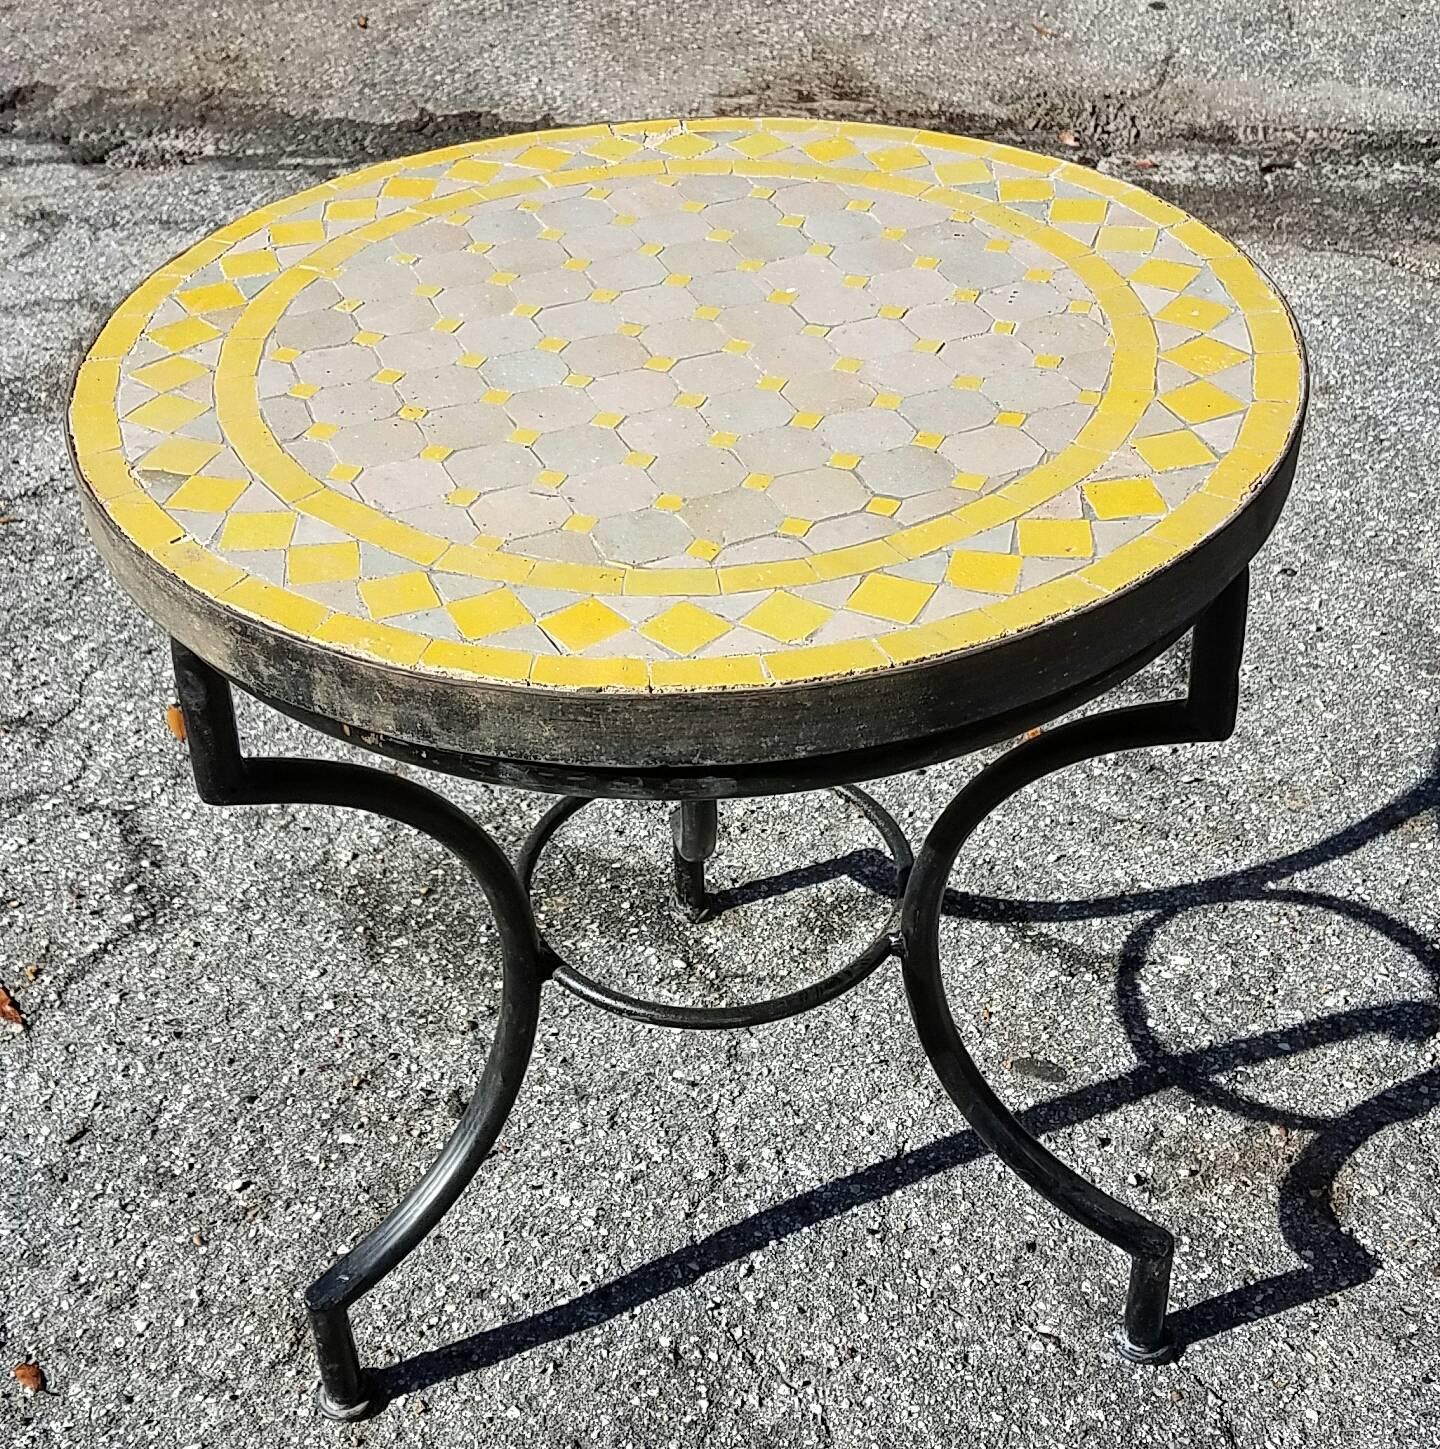 Yellow / Tan Moroccan Mosaic Table, Wrought Iron Base For Sale 1